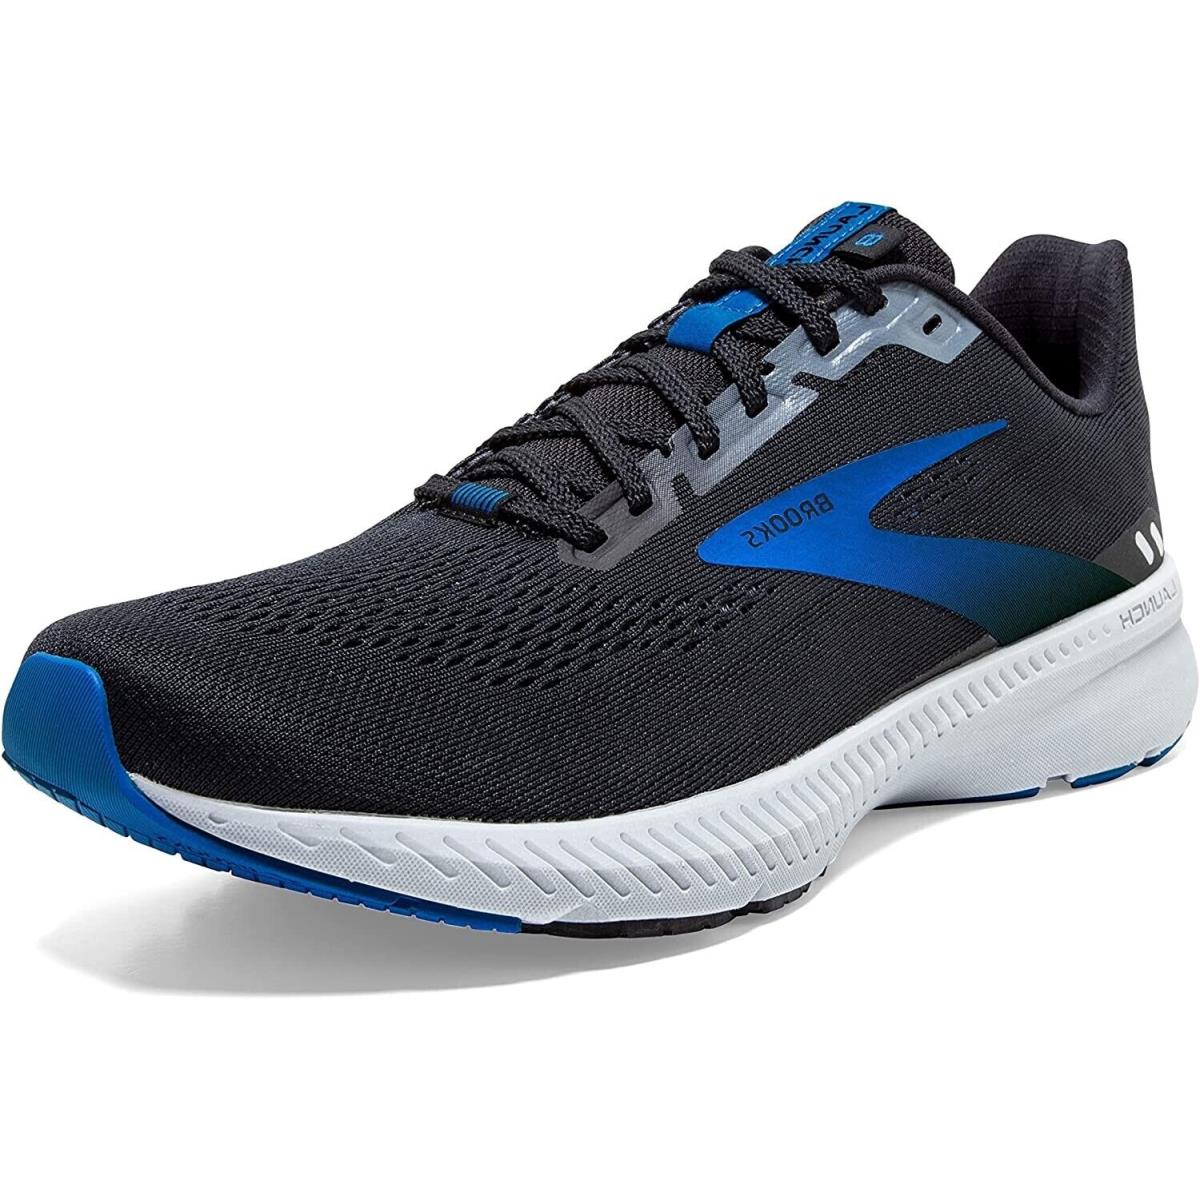 Brooks Launch 8 Neutral Mens Running Shoes Athletic Black Blue Sneakers US 10M - Black/Grey/Blue